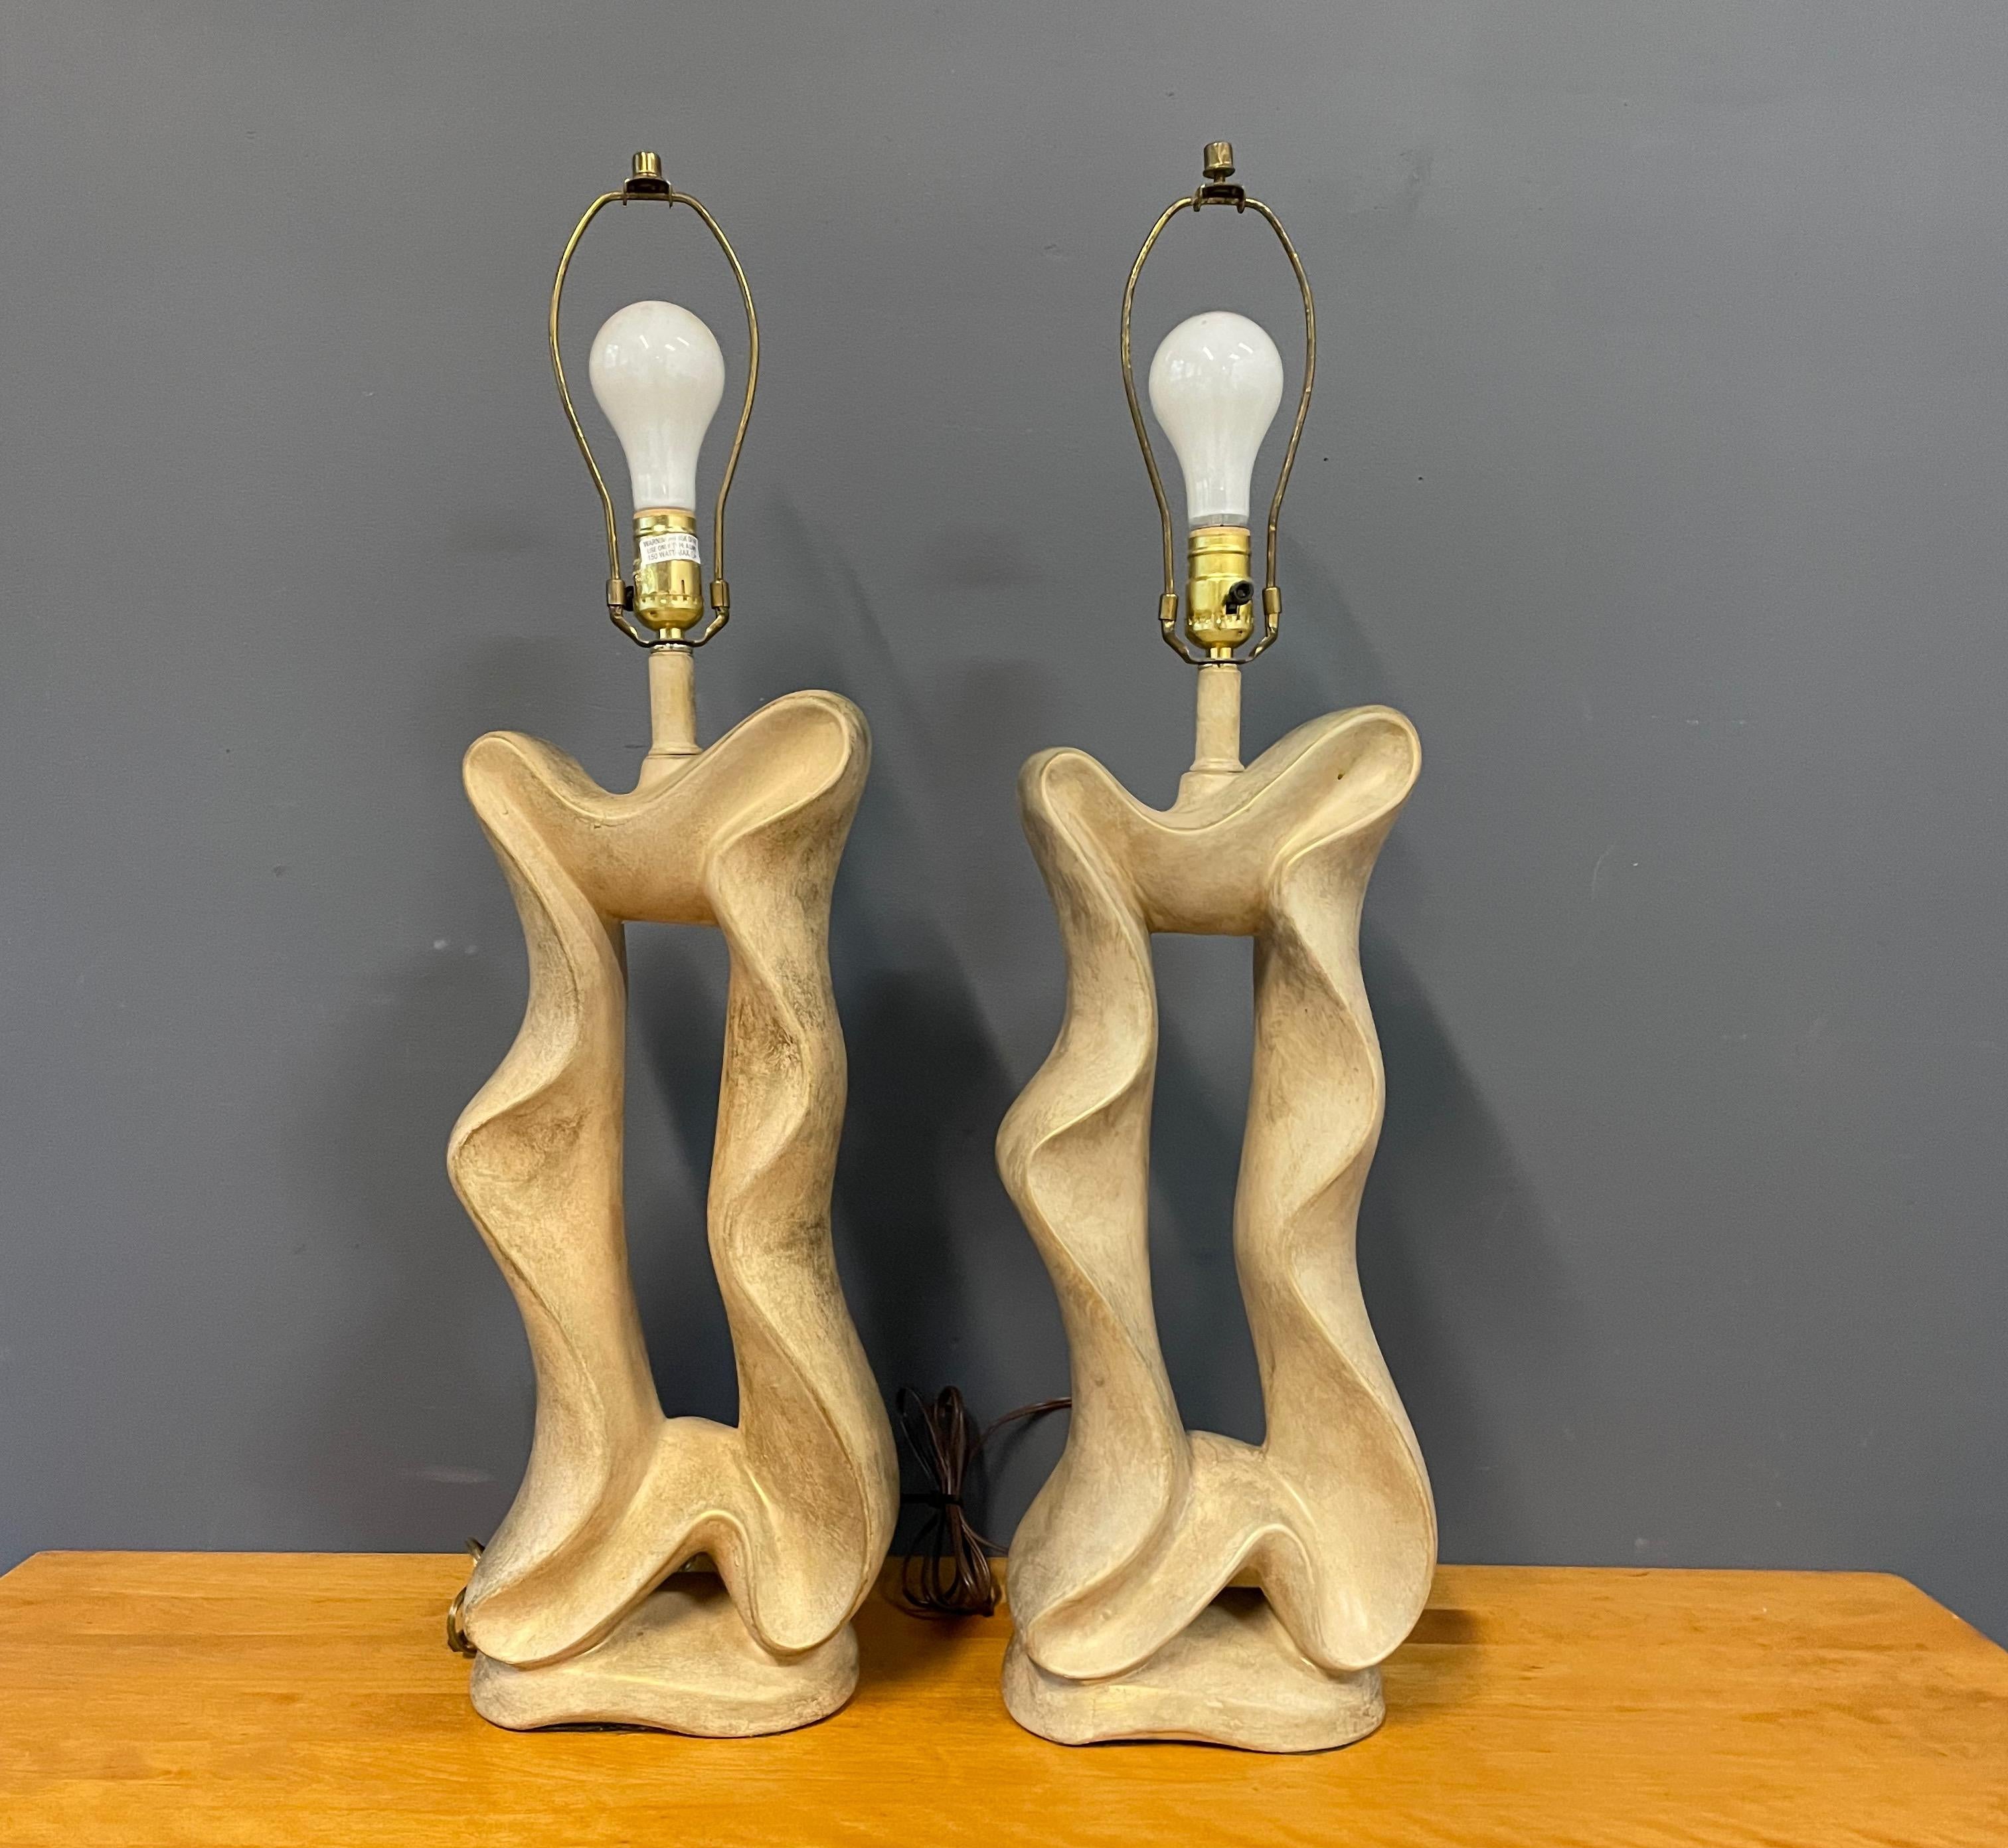 Pair of unusual, ceramic lamps in a ribbon form in a neutral color with a gold wash produced by Jaru.